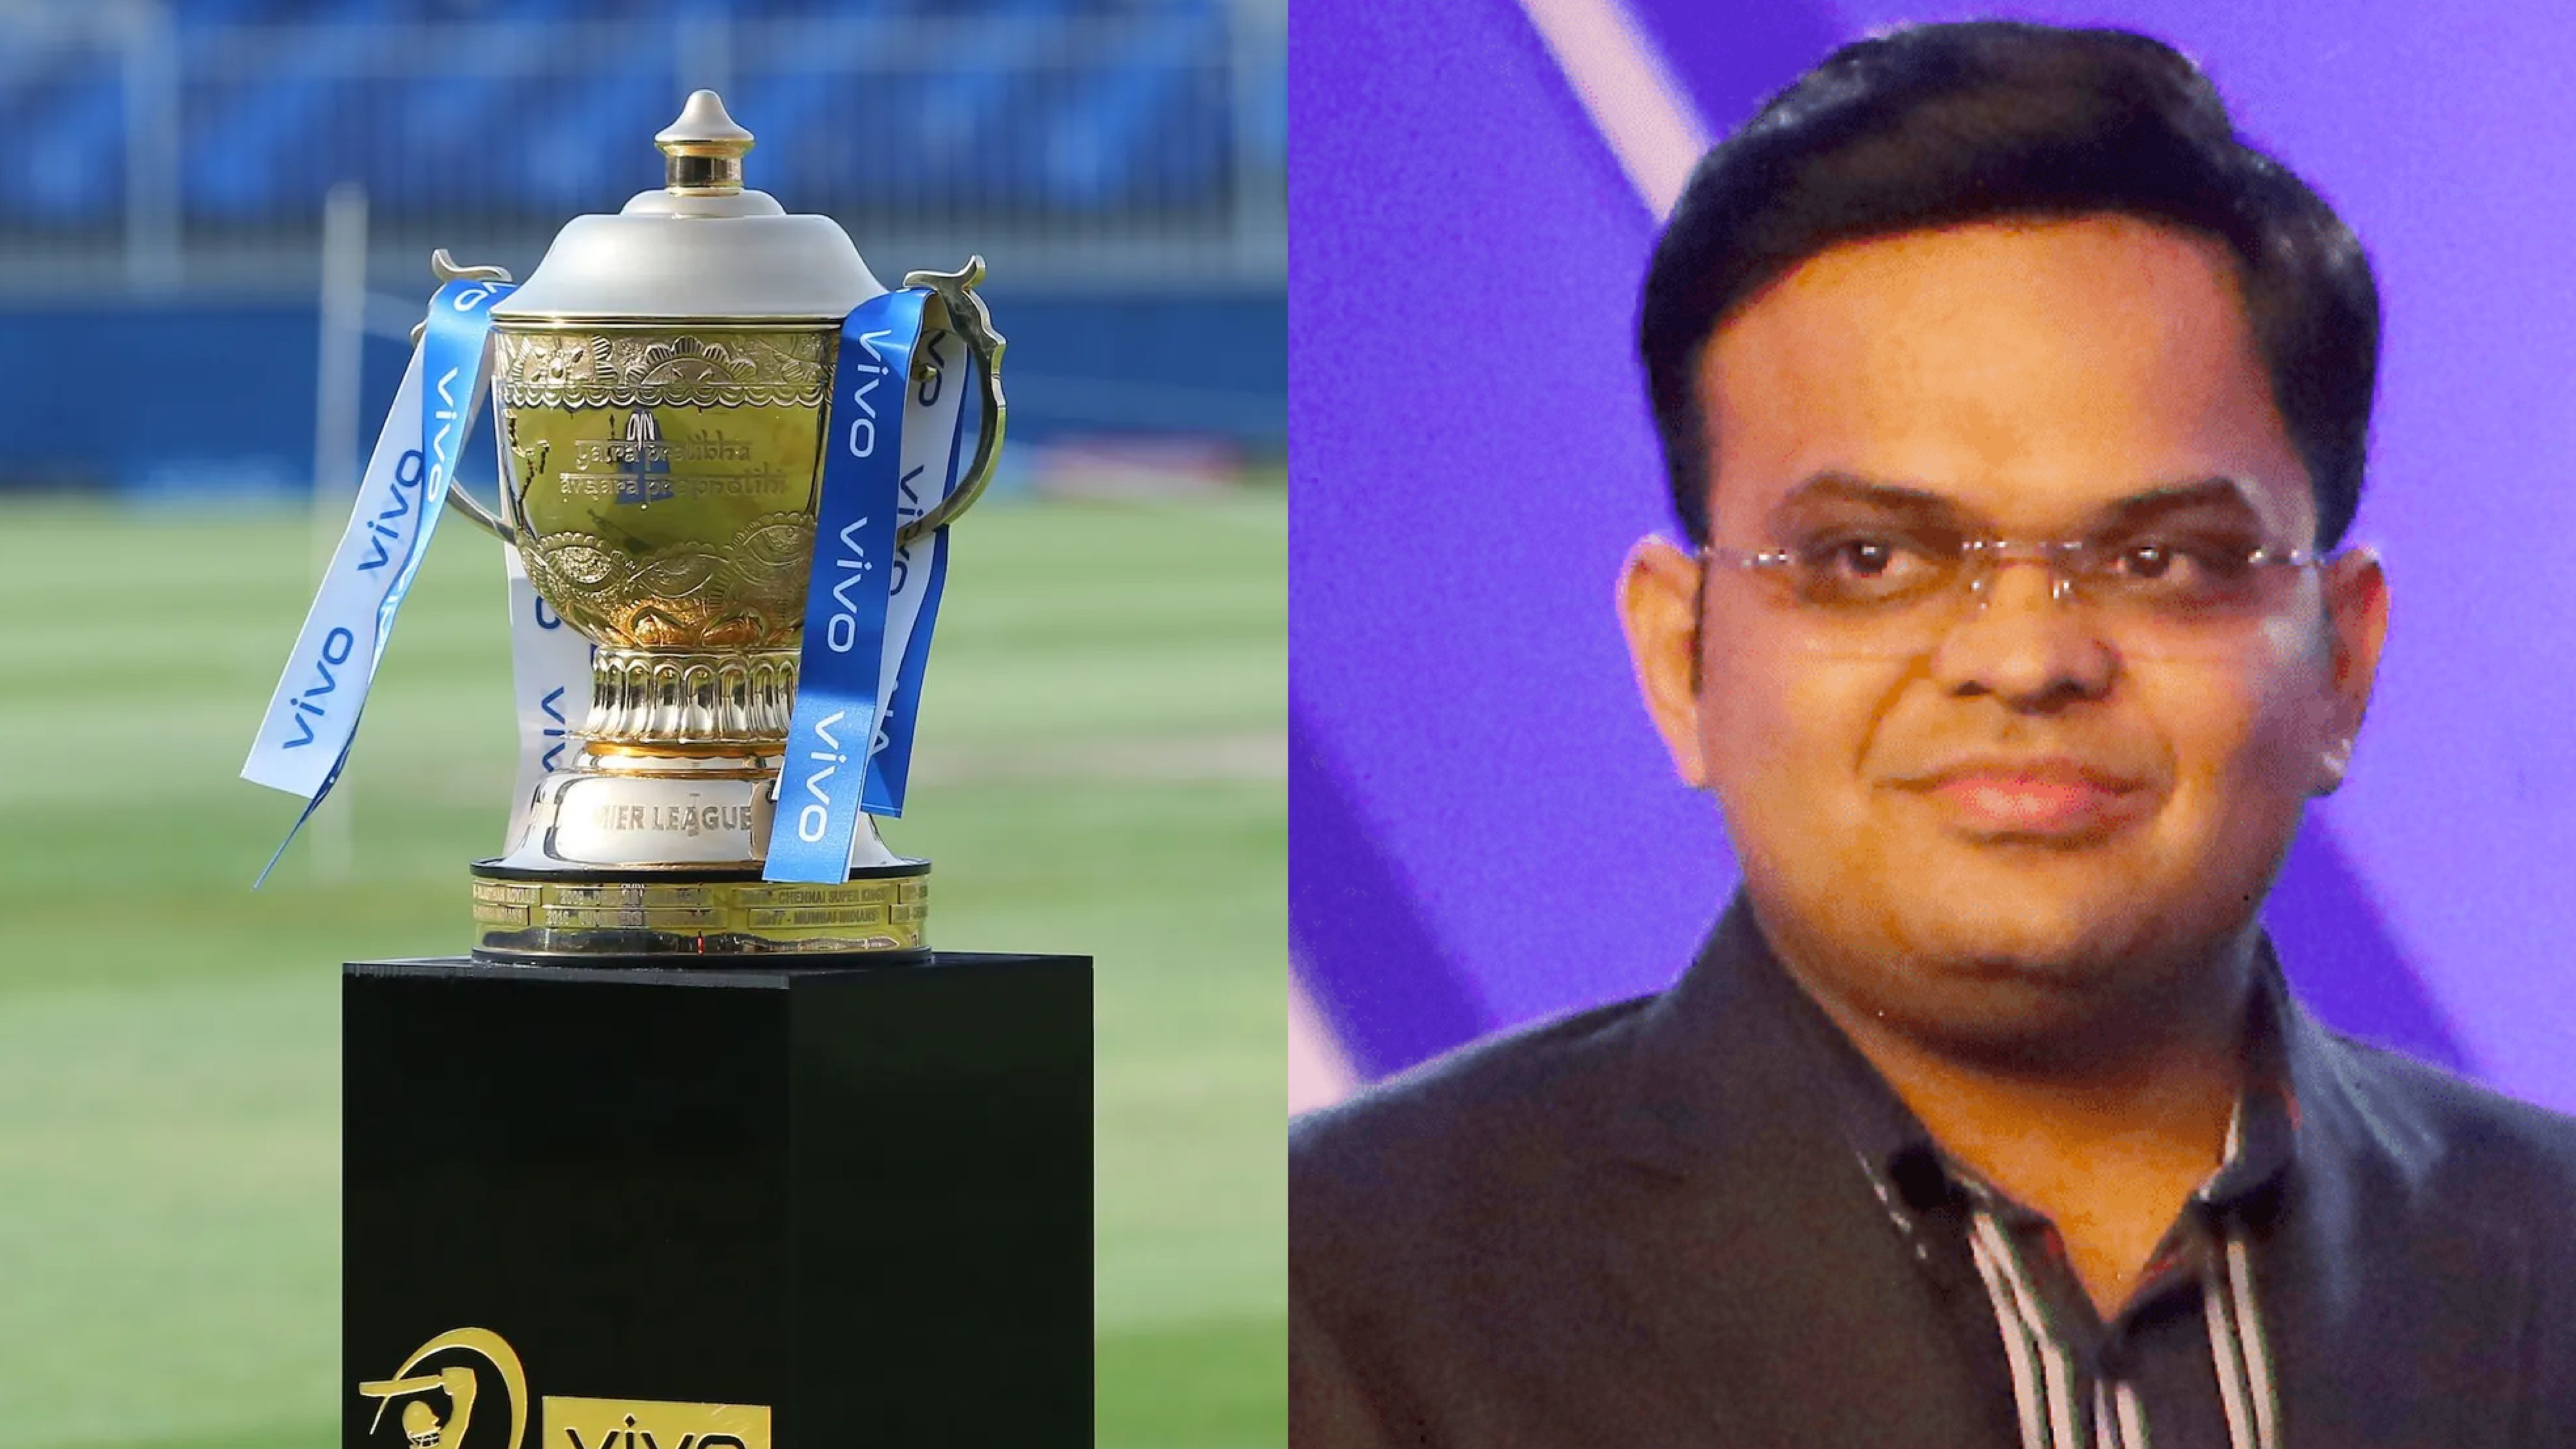 IPL 2022: “We will leave no stone unturned in ensuring that IPL stays in India” - Jay Shah